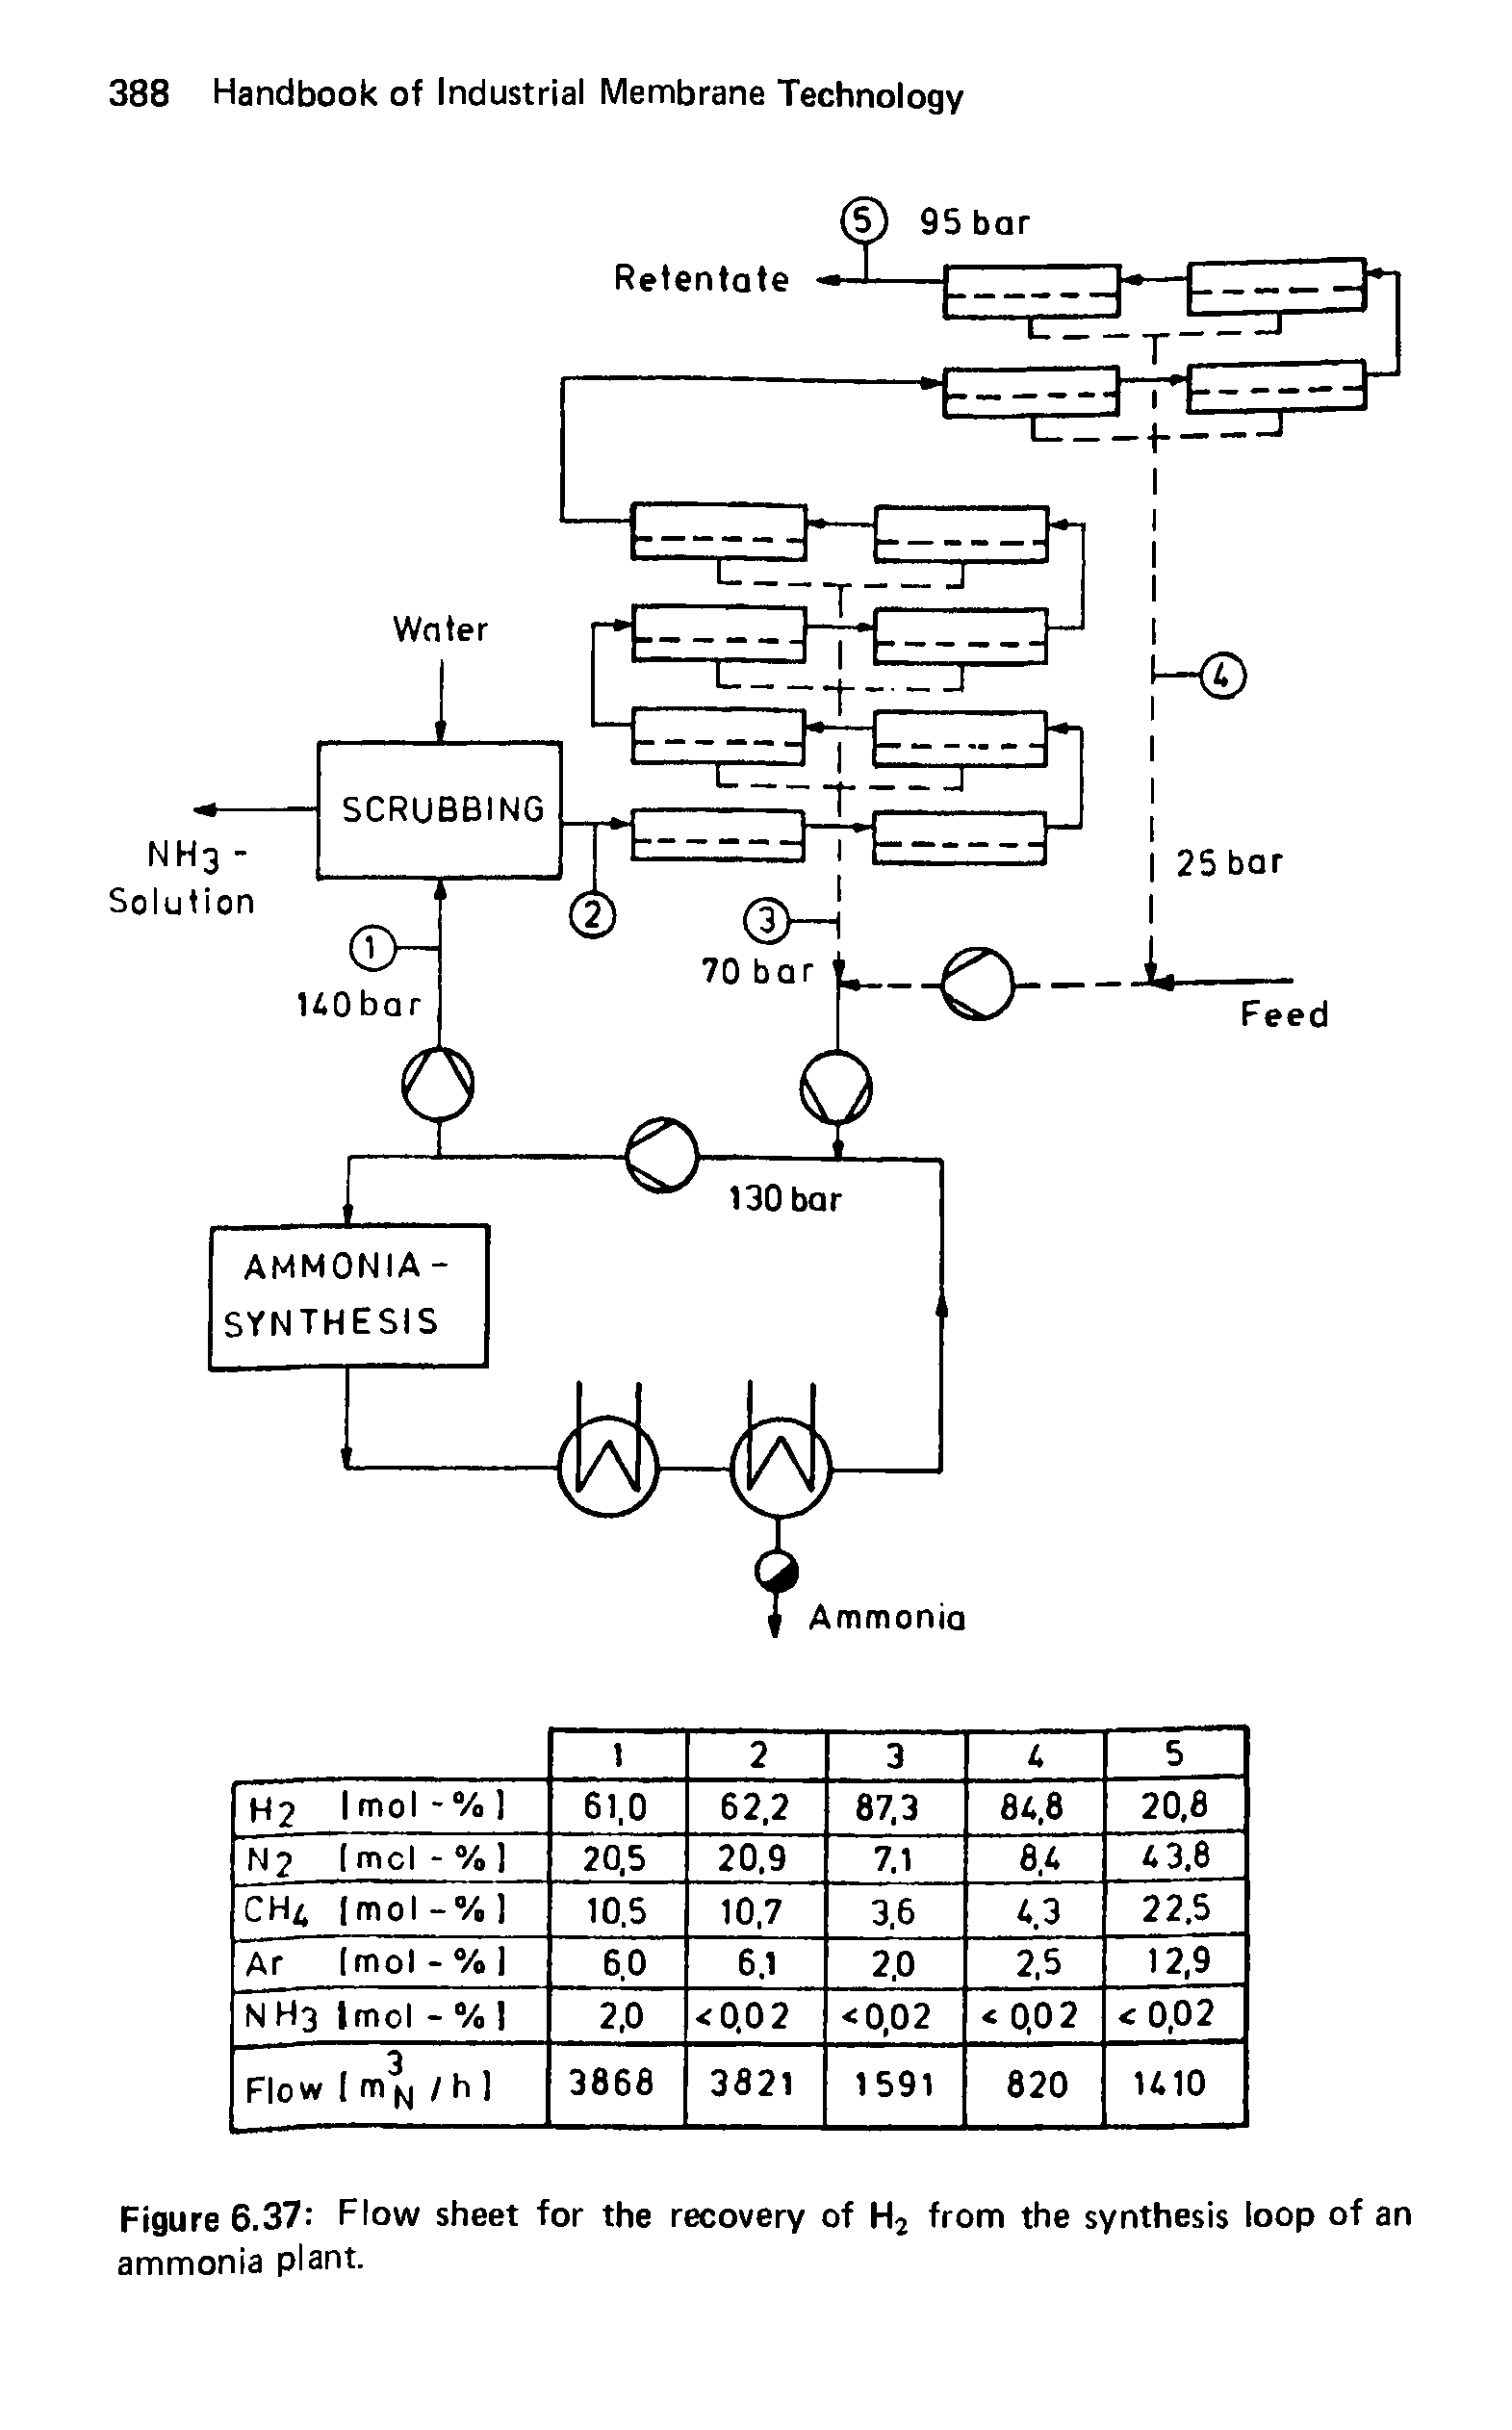 Figure 6.37 Flow sheet for the recovery of H2 from the synthesis loop of an ammonia plant.